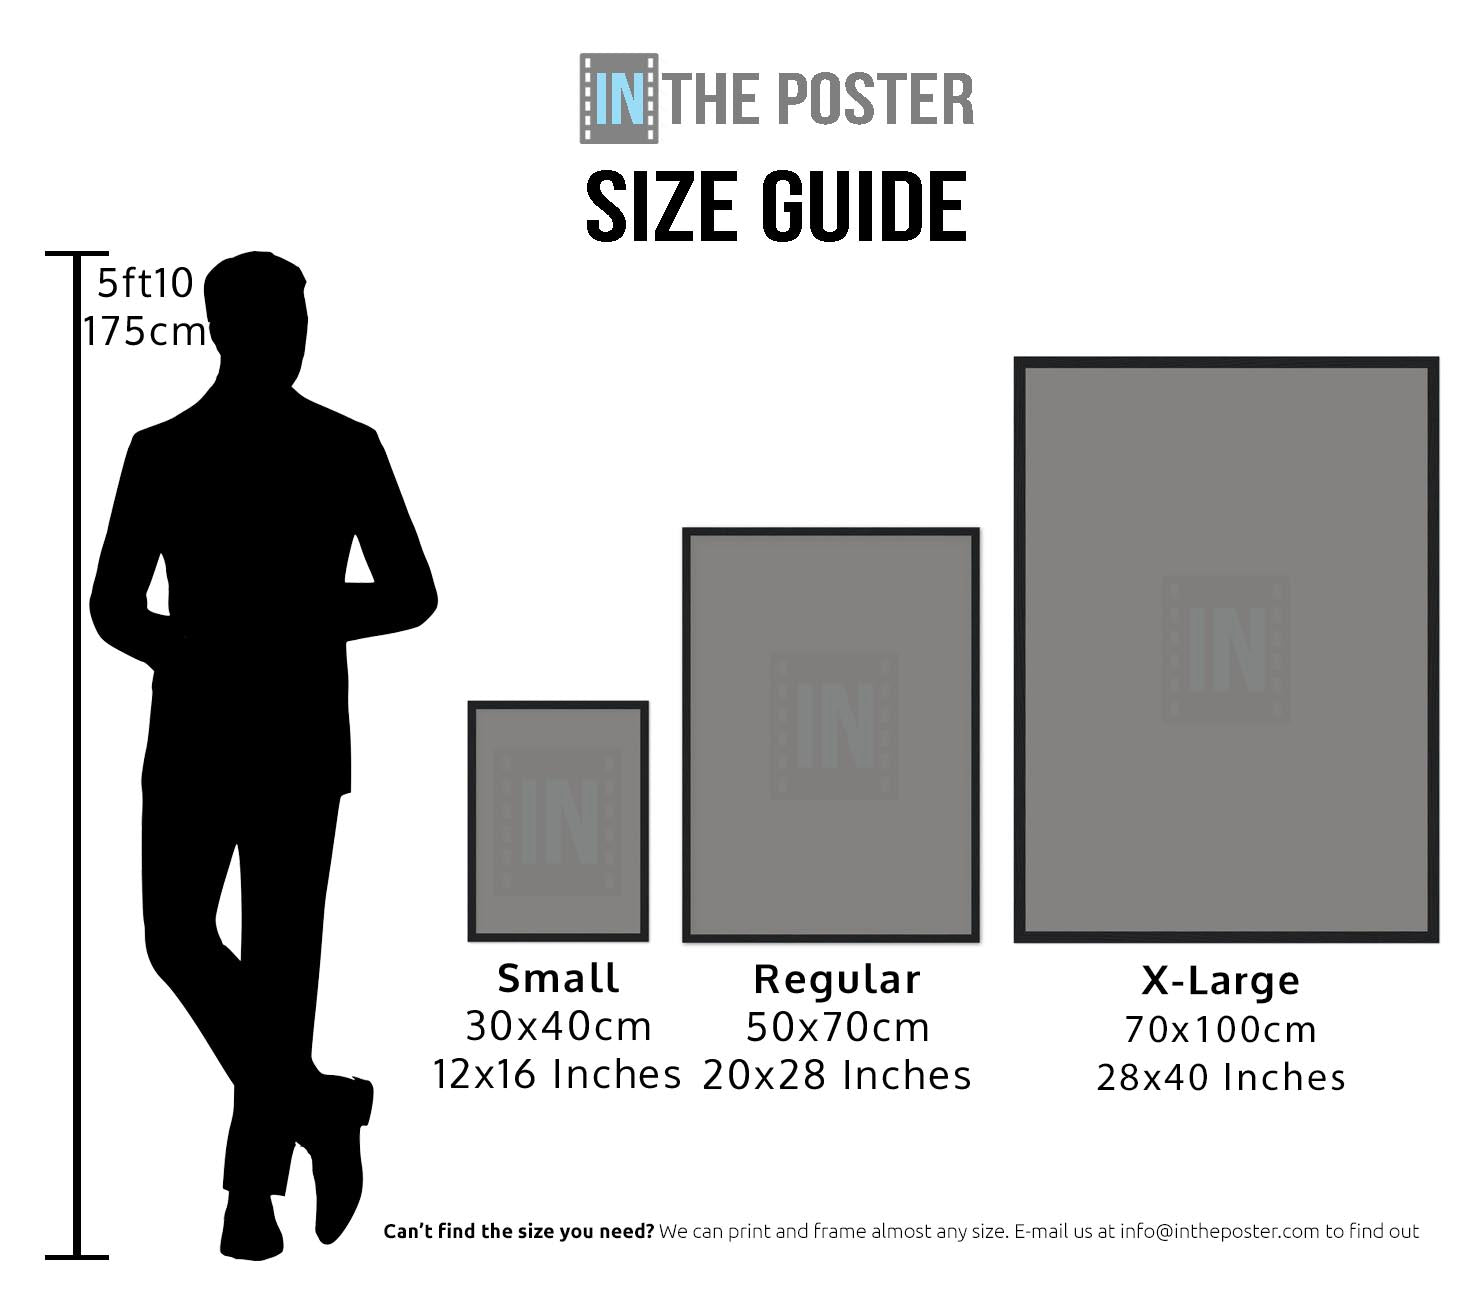 A chart showing the relative size of each three sizes of movie poster